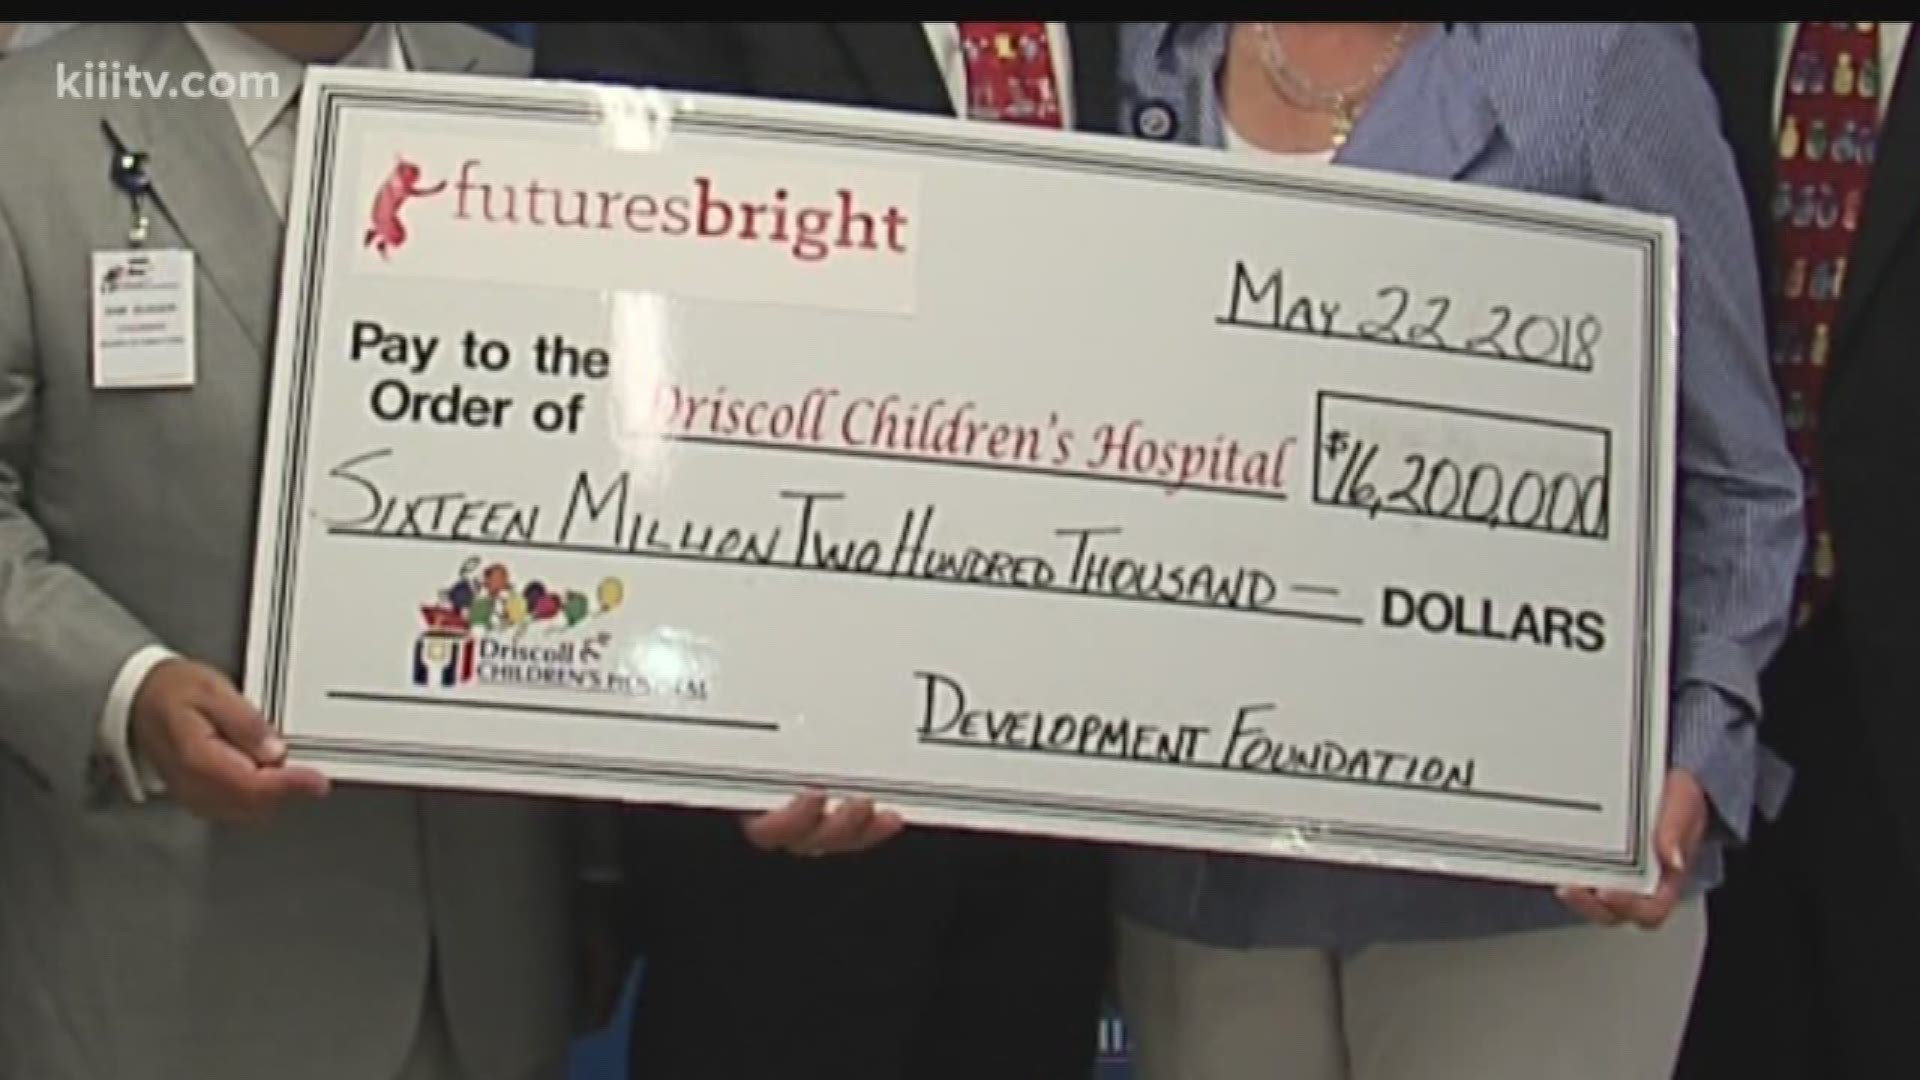 All proceeds from the future's bright campaign will go towards assisting with the historic building project.